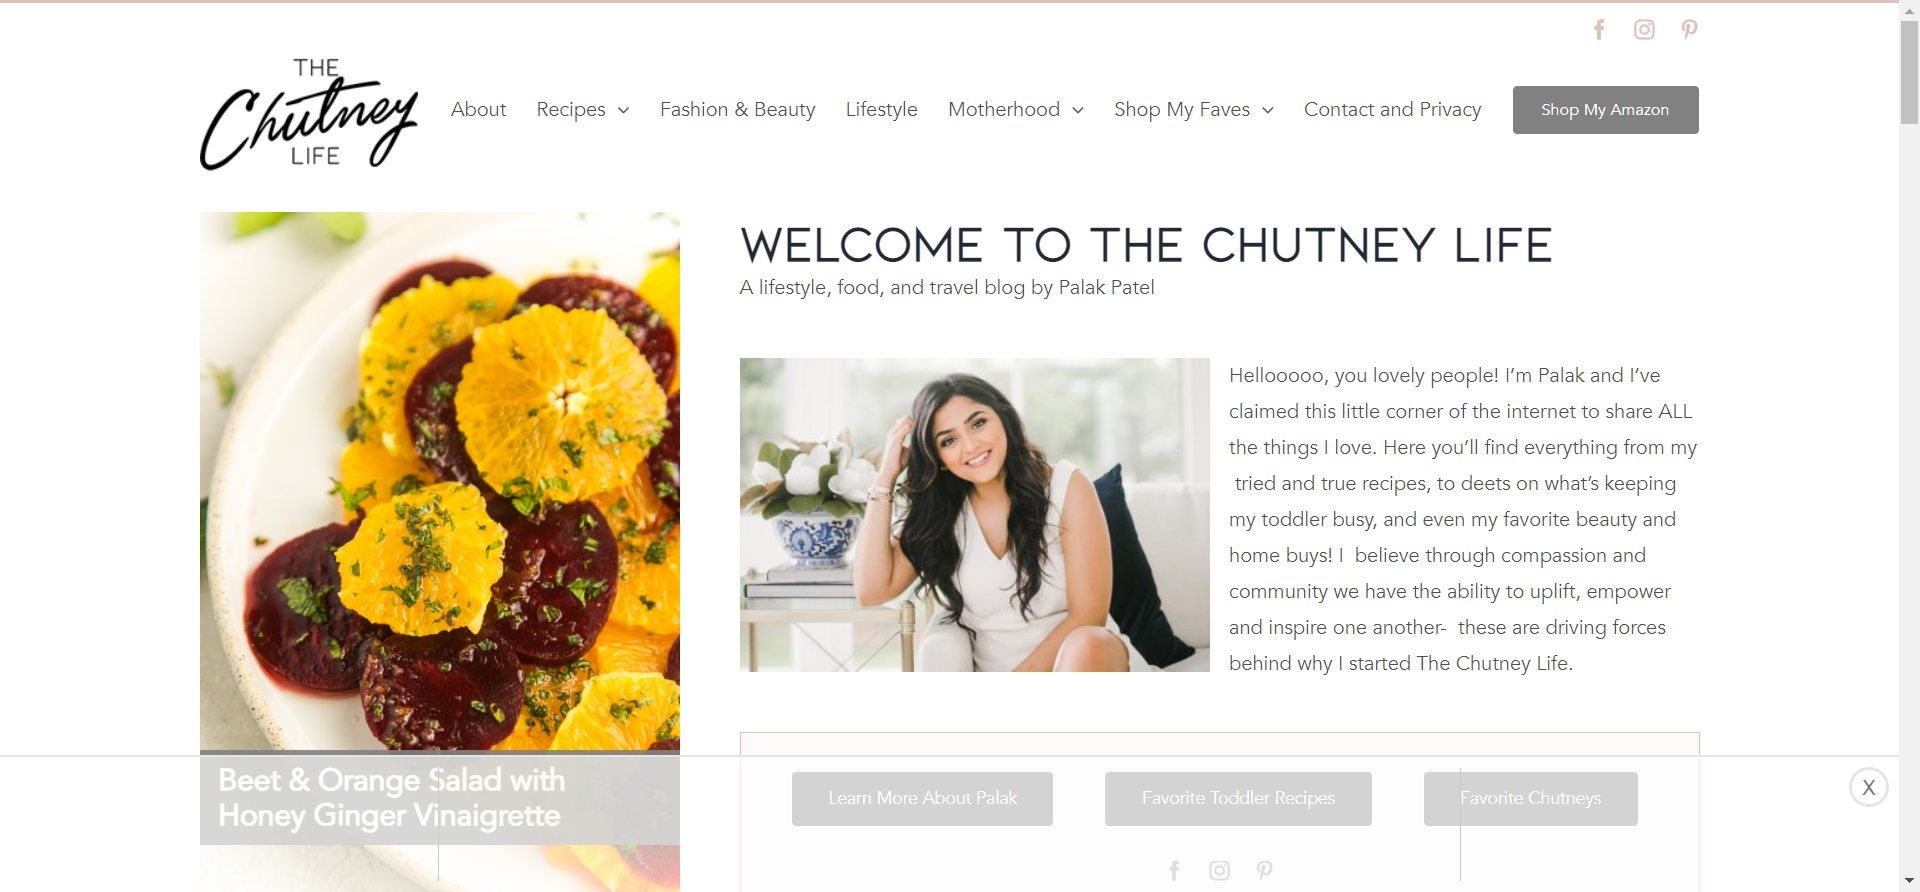 The Chutney Life by Palak